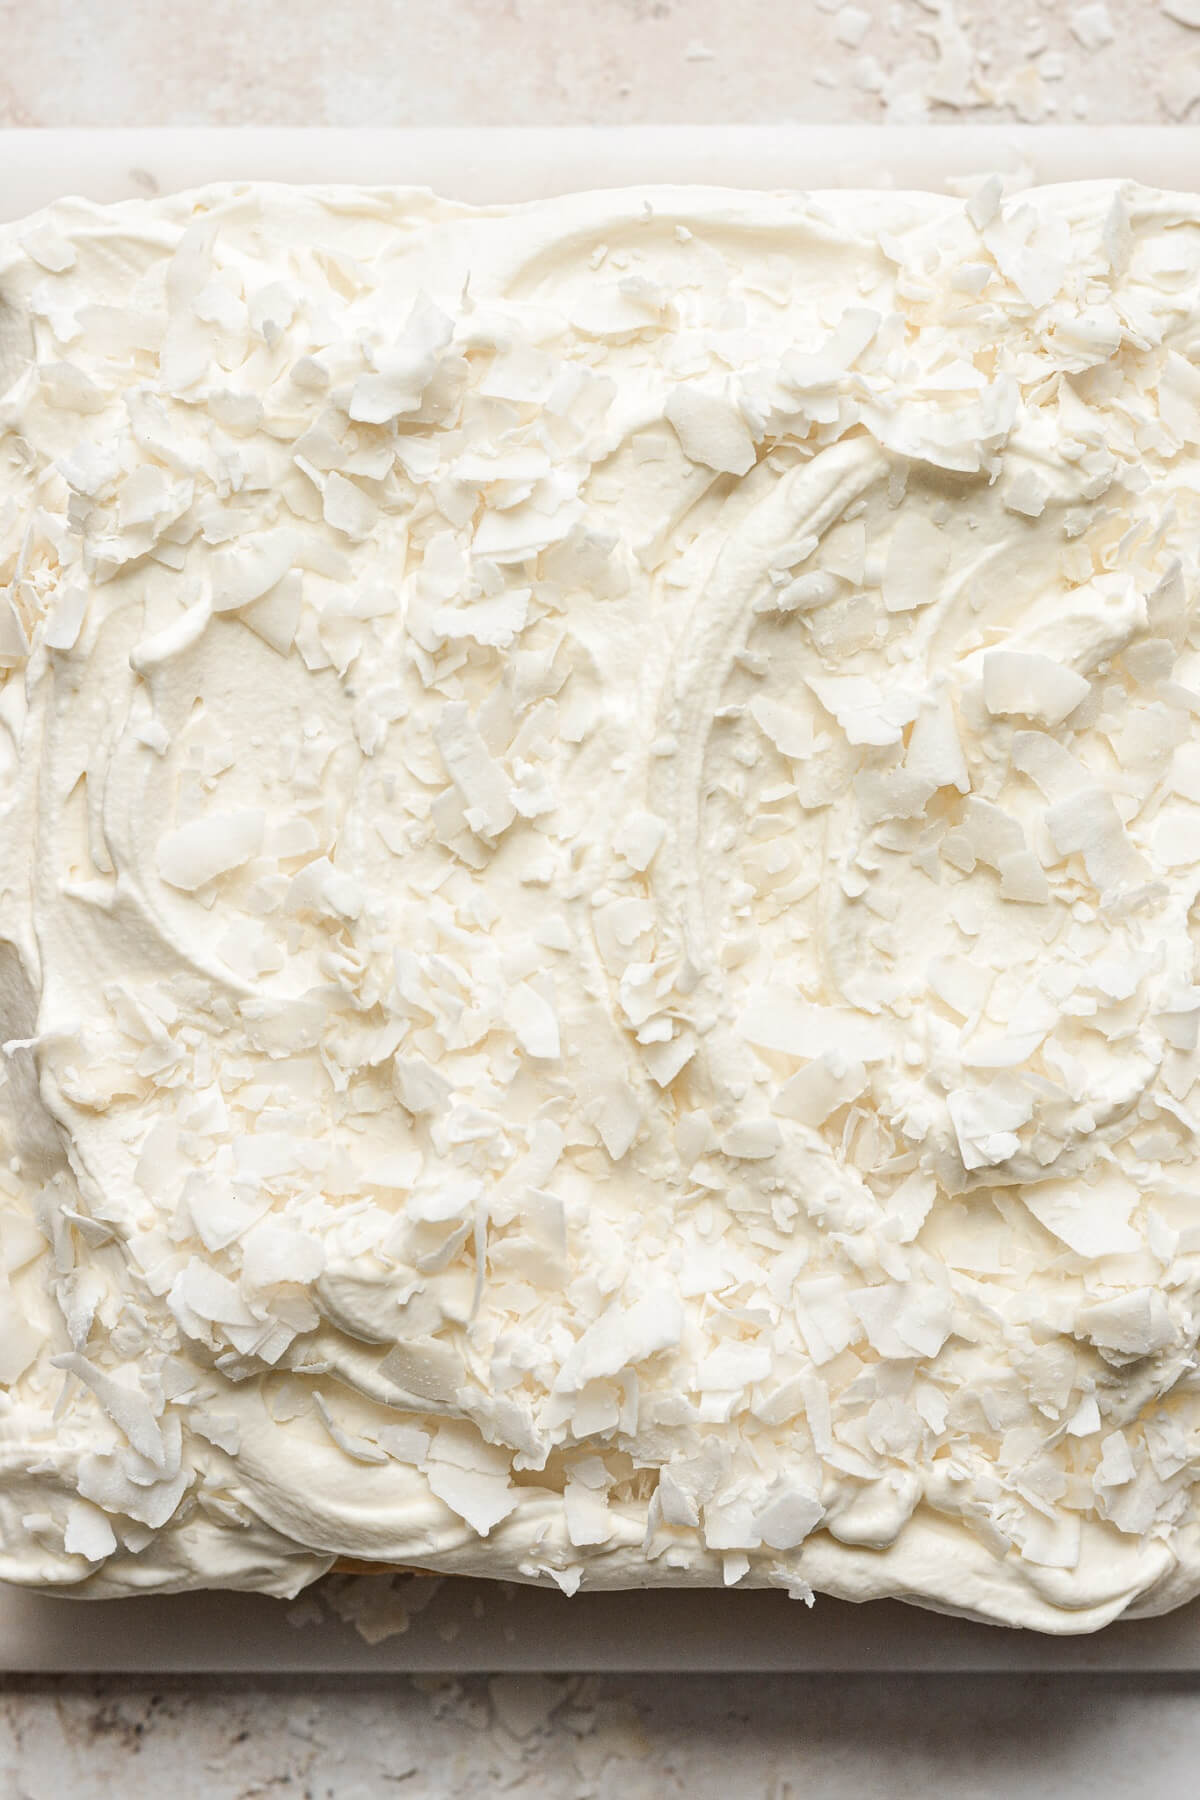 Mascarpone whipped cream sprinkled with coconut.